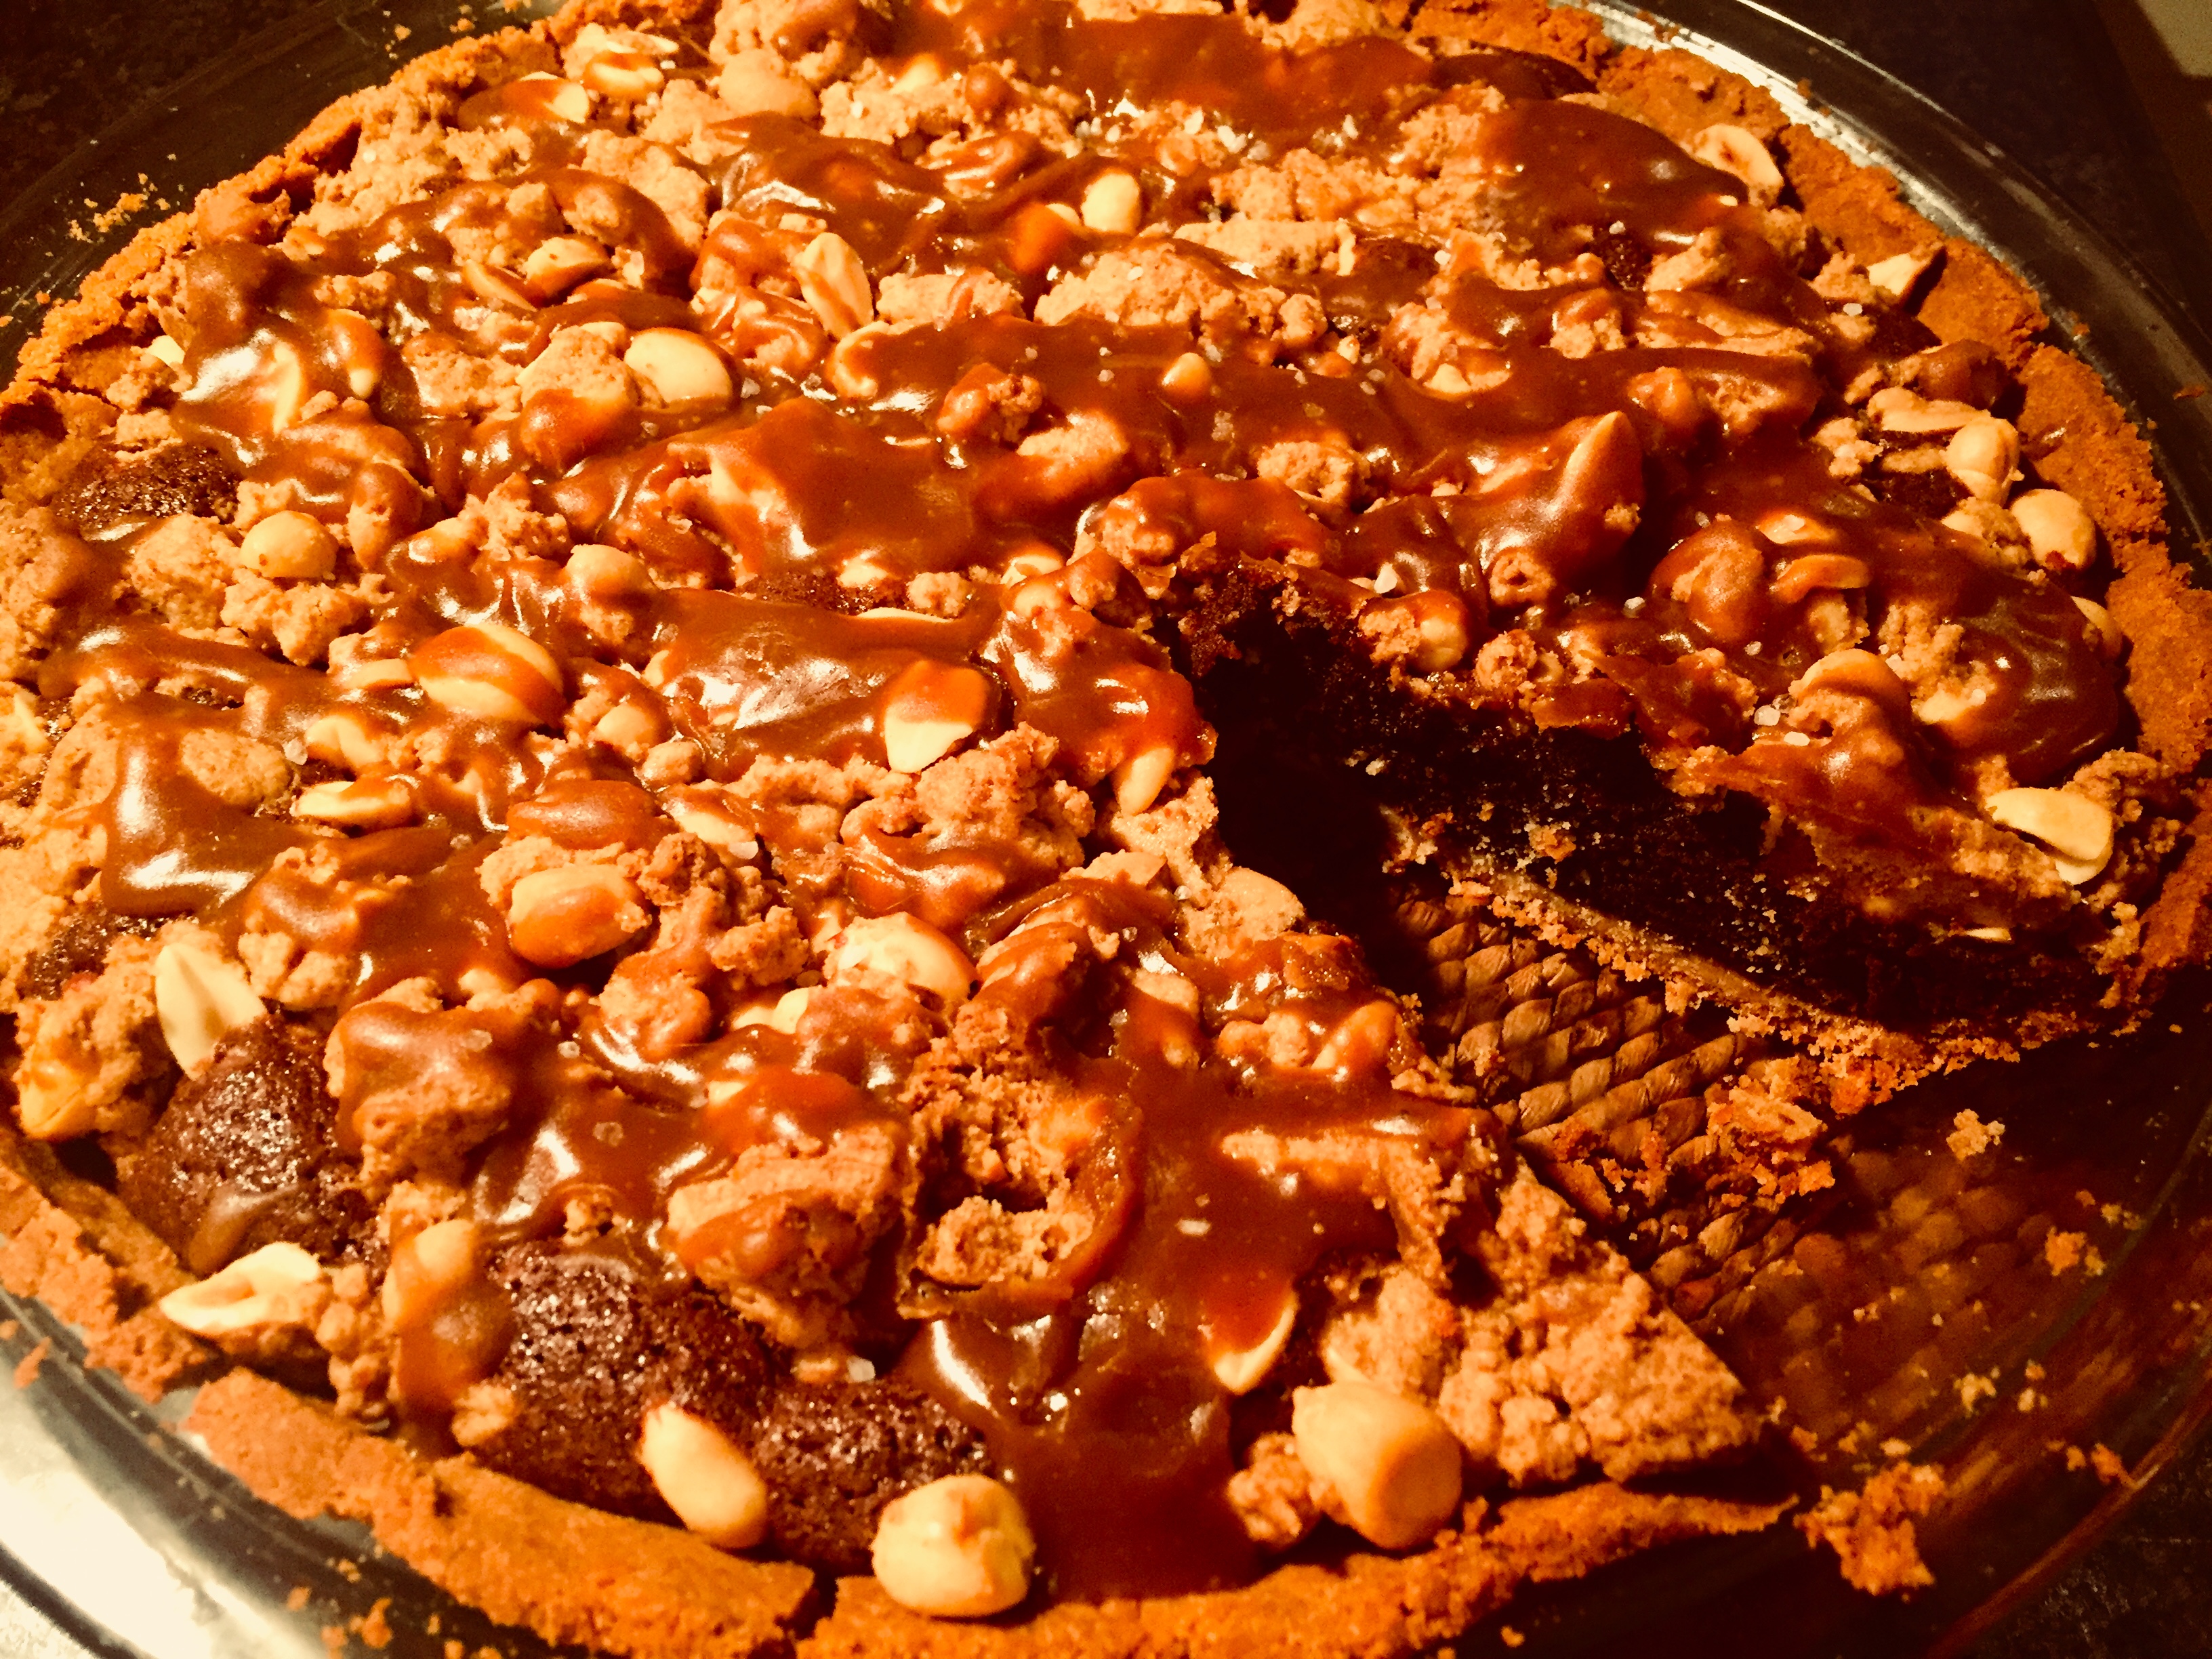 This gluten free & dairy free salted caramel peanut butter fudge pie is an absolute pleasure to enjoy ... especially with homemade dairy free caramel sauce